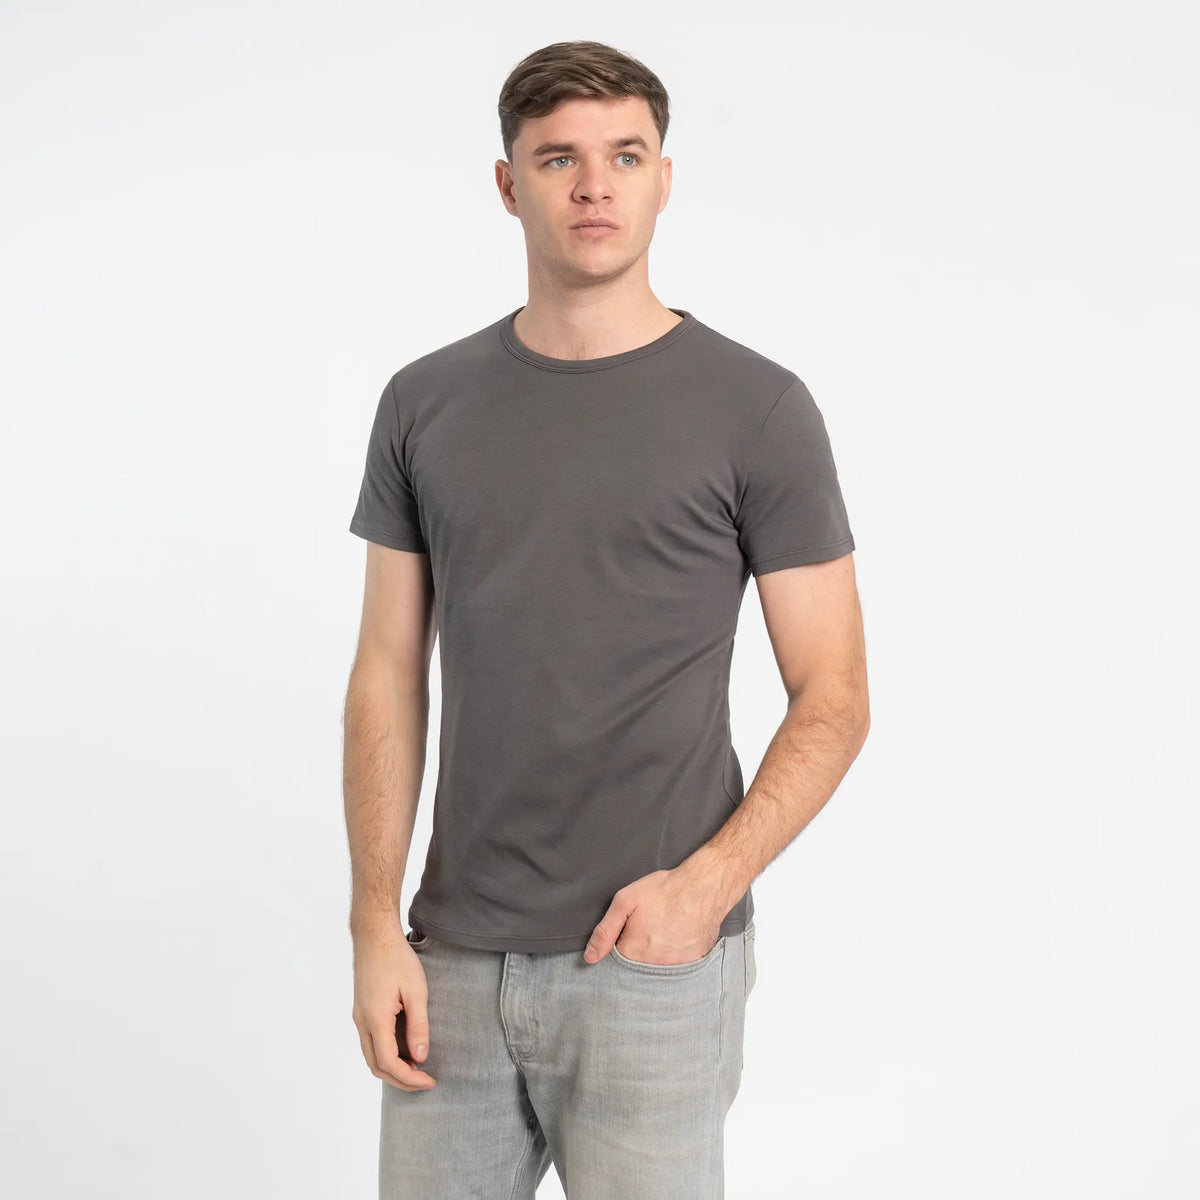 mens sustainable tshirt crew neck color gray